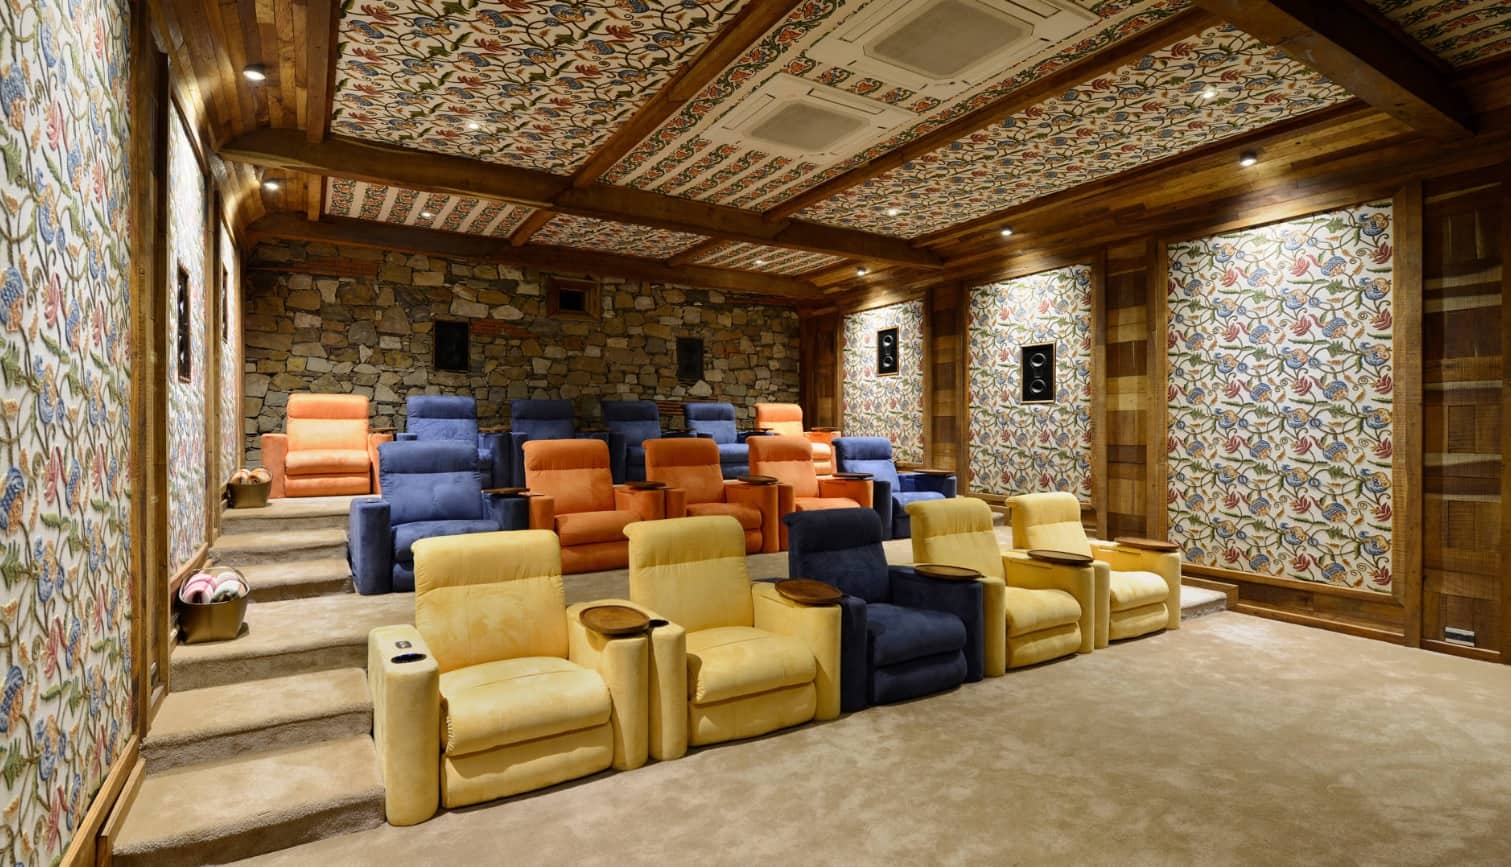 5 Home Theater Tips Other Than Getting a Kicking Projector. Pro home cinema for a lot of friends with colorful seats